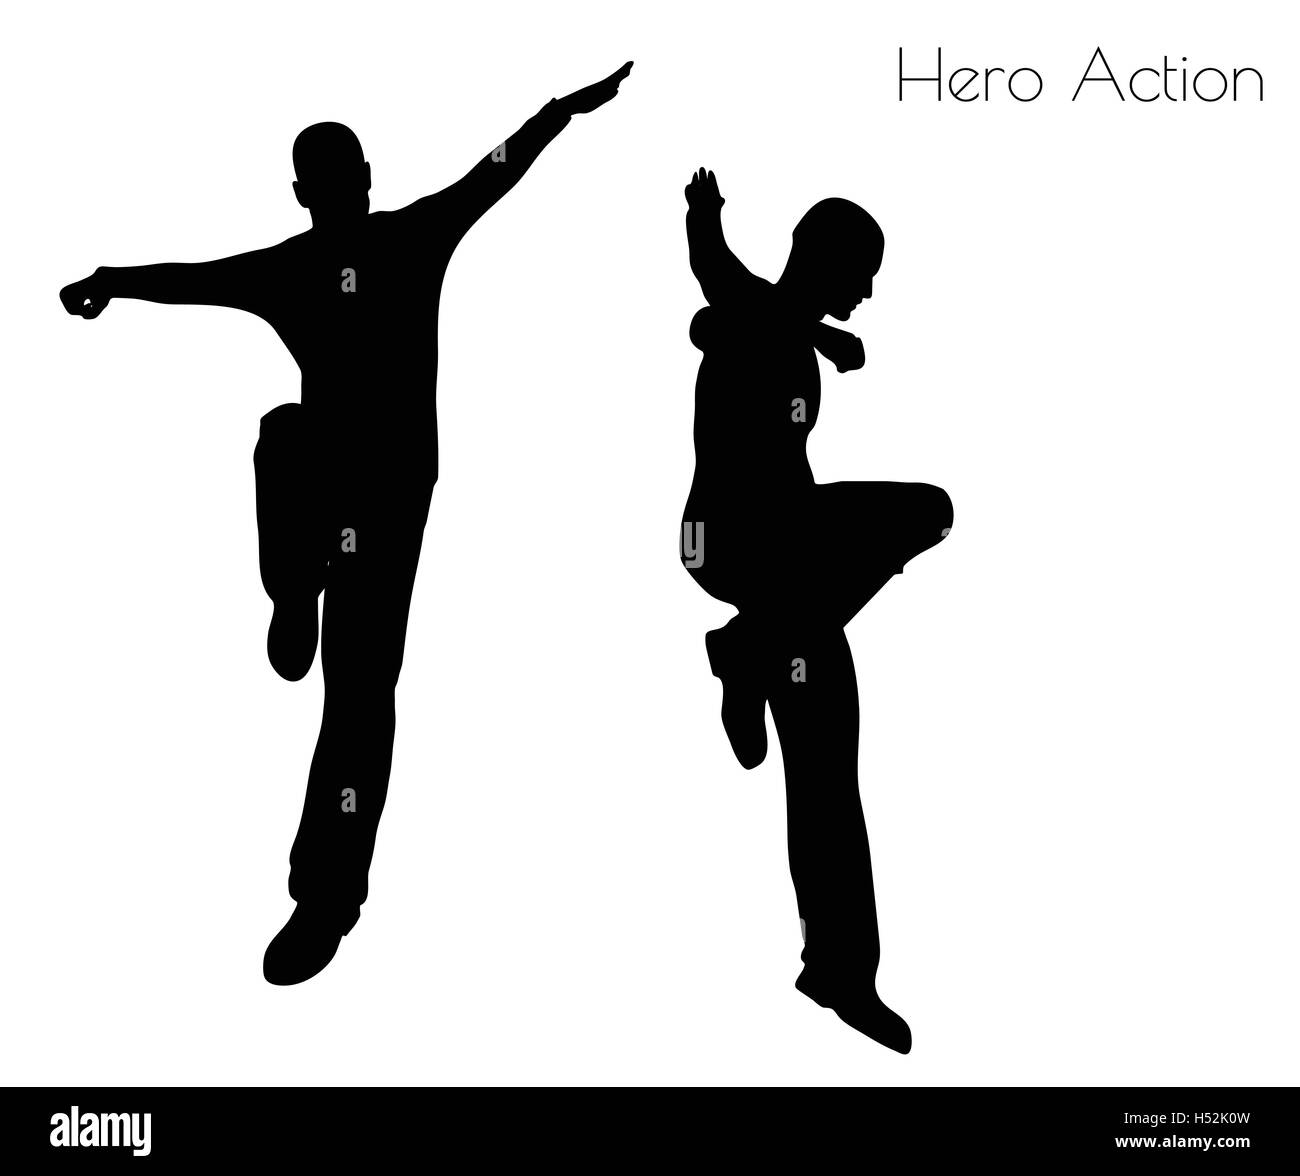 EPS 10 vector illustration of man in Hero Action pose on white background Stock Vector